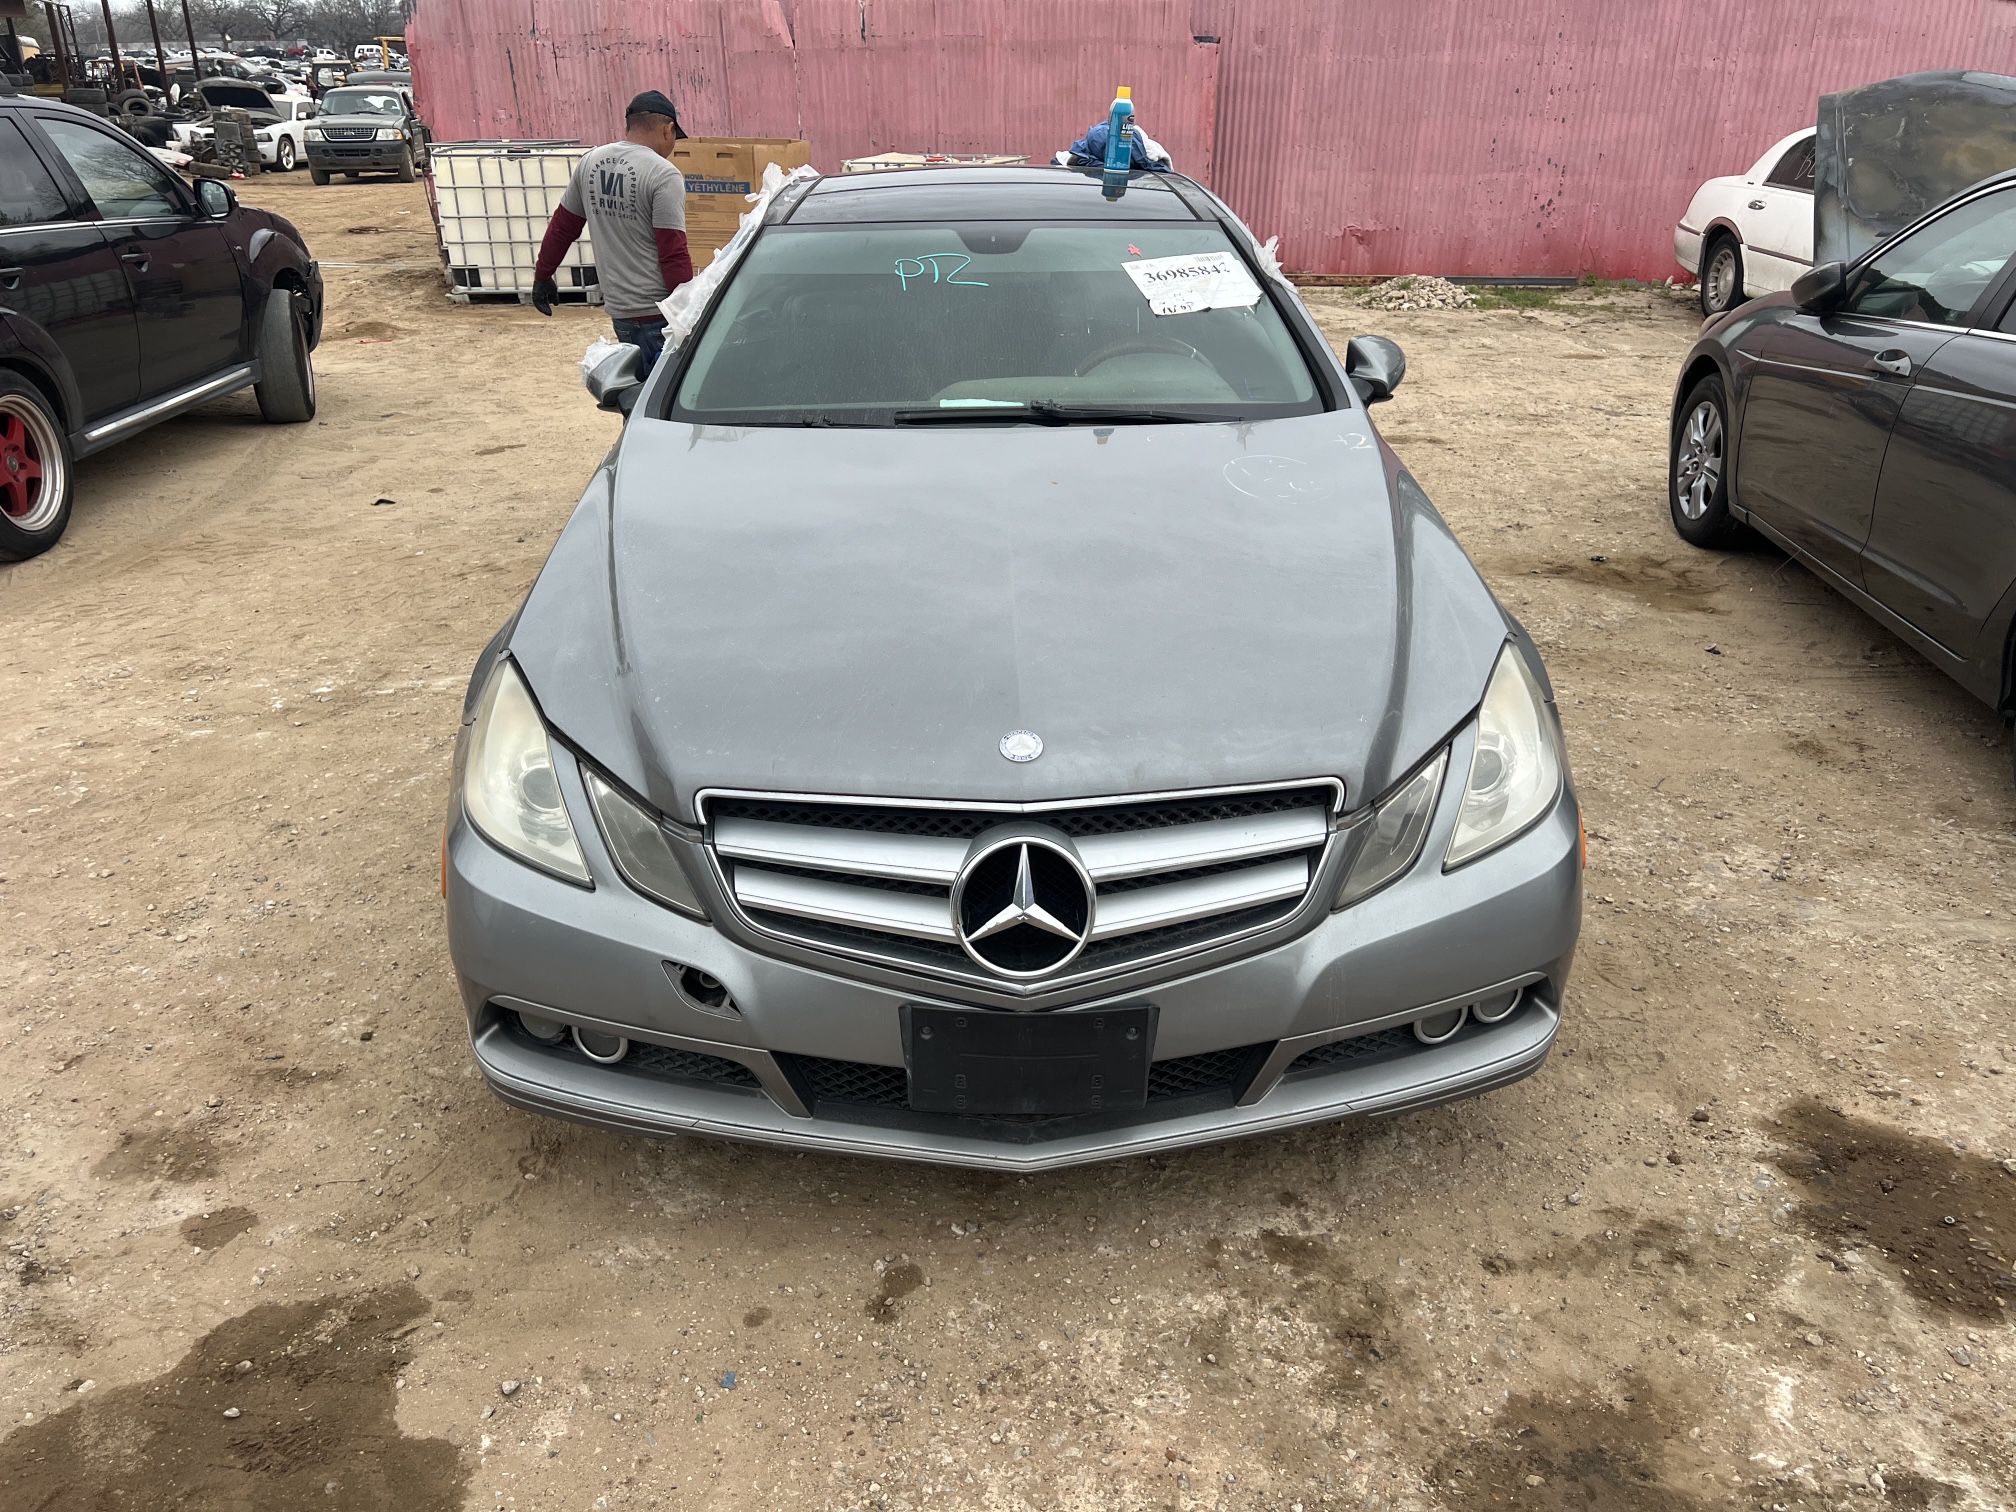 2010 Mercedes E350 - Parts Only #BH6